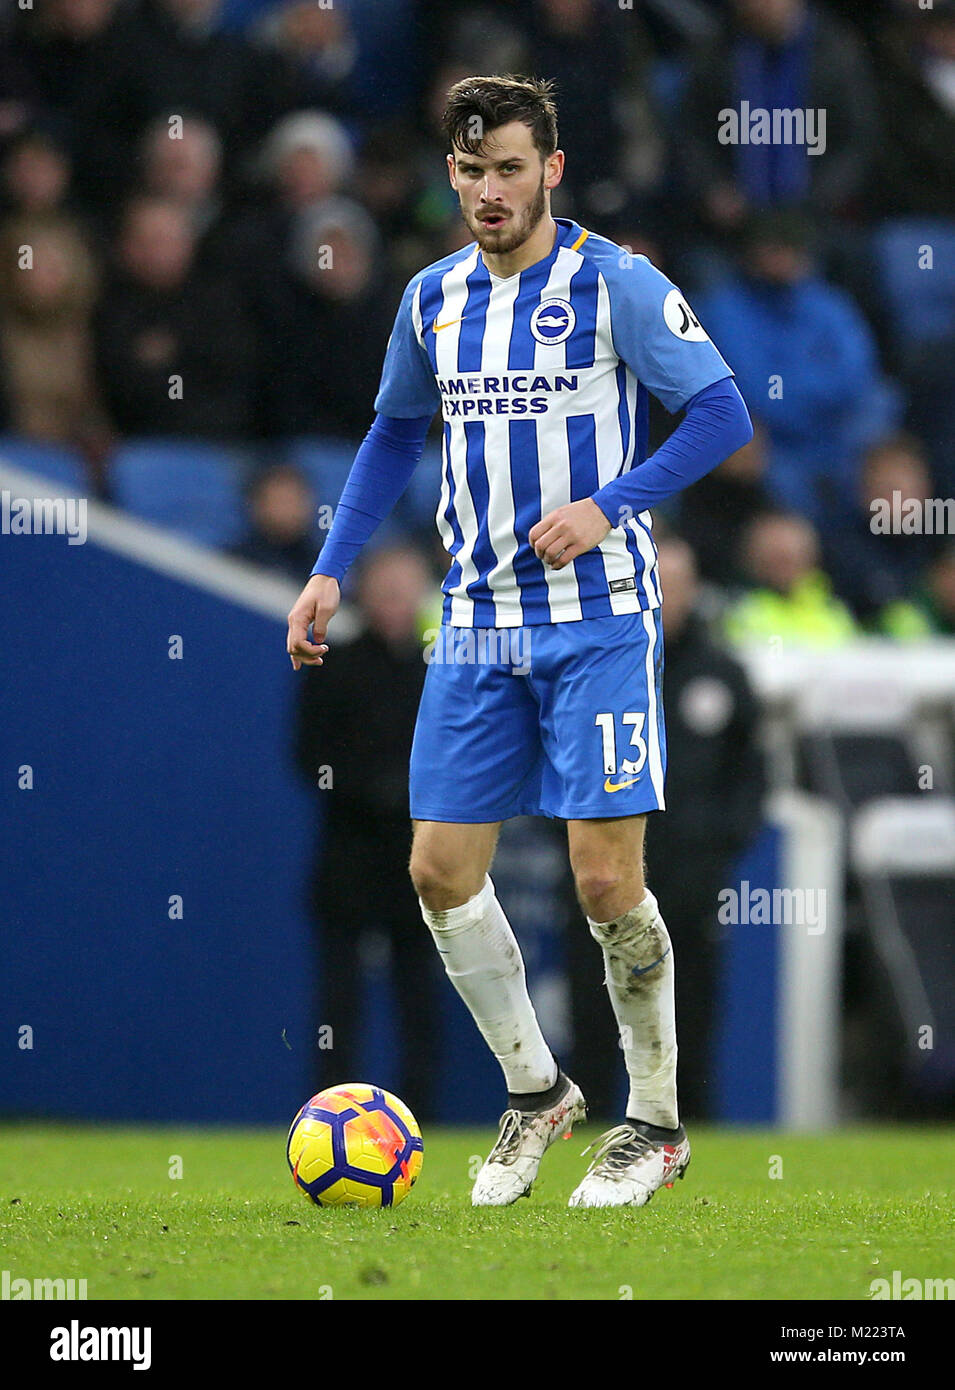 Brighton & Hove Albion's Pascal Gross in action during the Premier League match at the AMEX Stadium, Brighton. PRESS ASSOCIATION Photo. Picture date: Saturday February 3, 2018. See PA story SOCCER Brighton. Photo credit should read: Steven Paston/PA Wire. RESTRICTIONS: No use with unauthorised audio, video, data, fixture lists, club/league logos or 'live' services. Online in-match use limited to 75 images, no video emulation. No use in betting, games or single club/league/player publications. Stock Photo